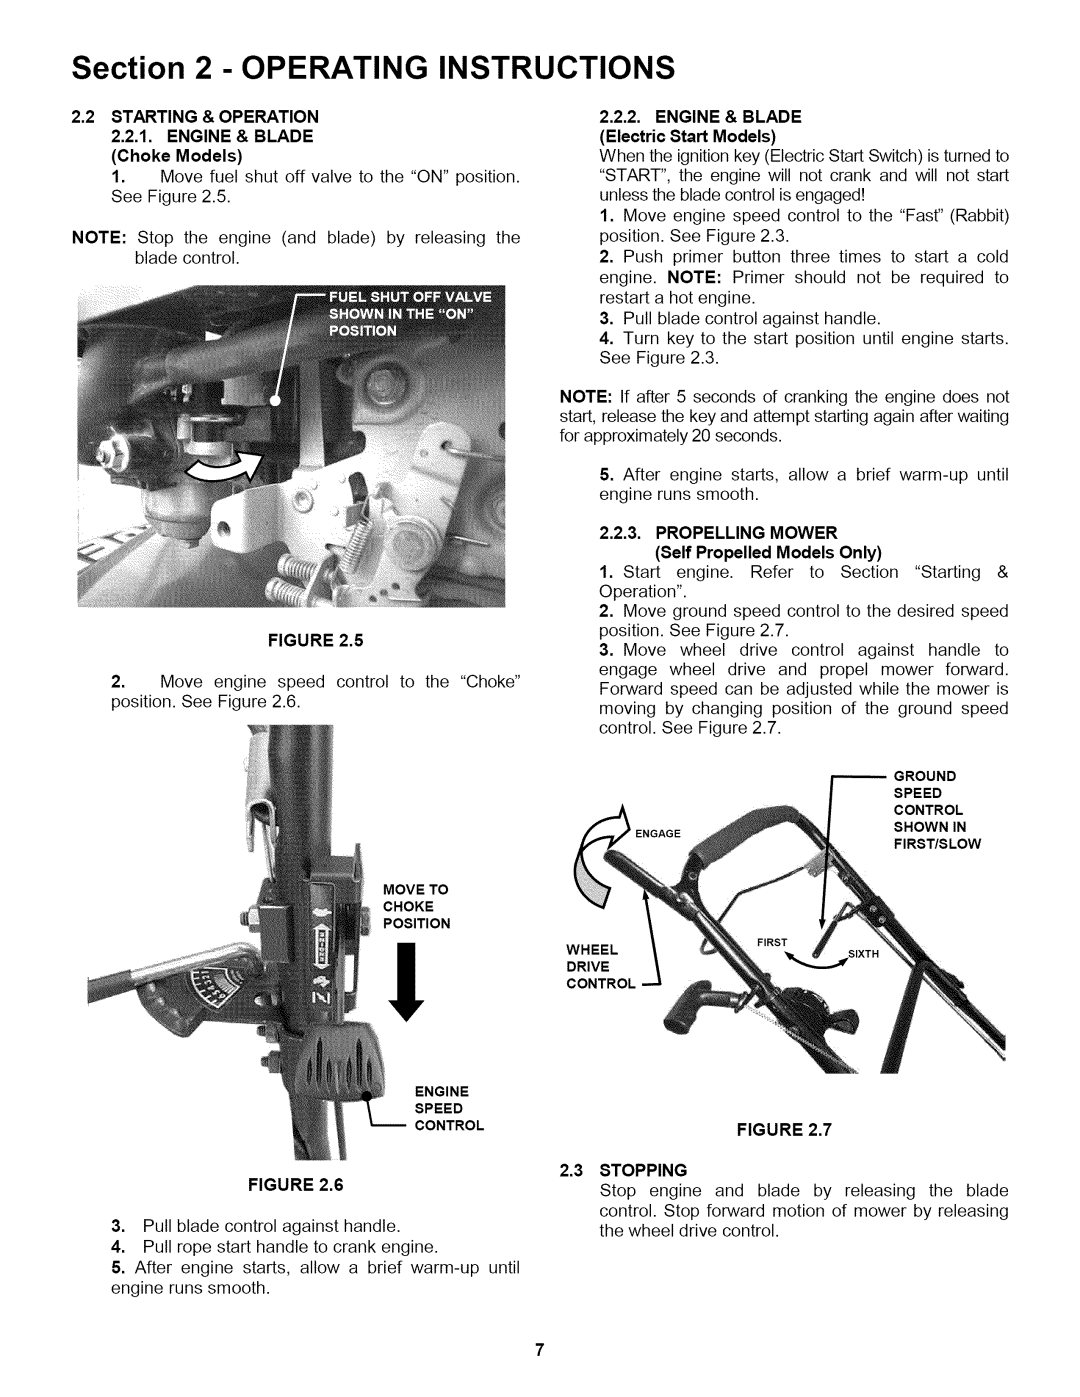 Snapper WP216517B Operating Instructions, 2.2STARTING & OPERATION 2.2.1. ENGINE & BLADE, Choke Models, Figure, 3STOPPING 